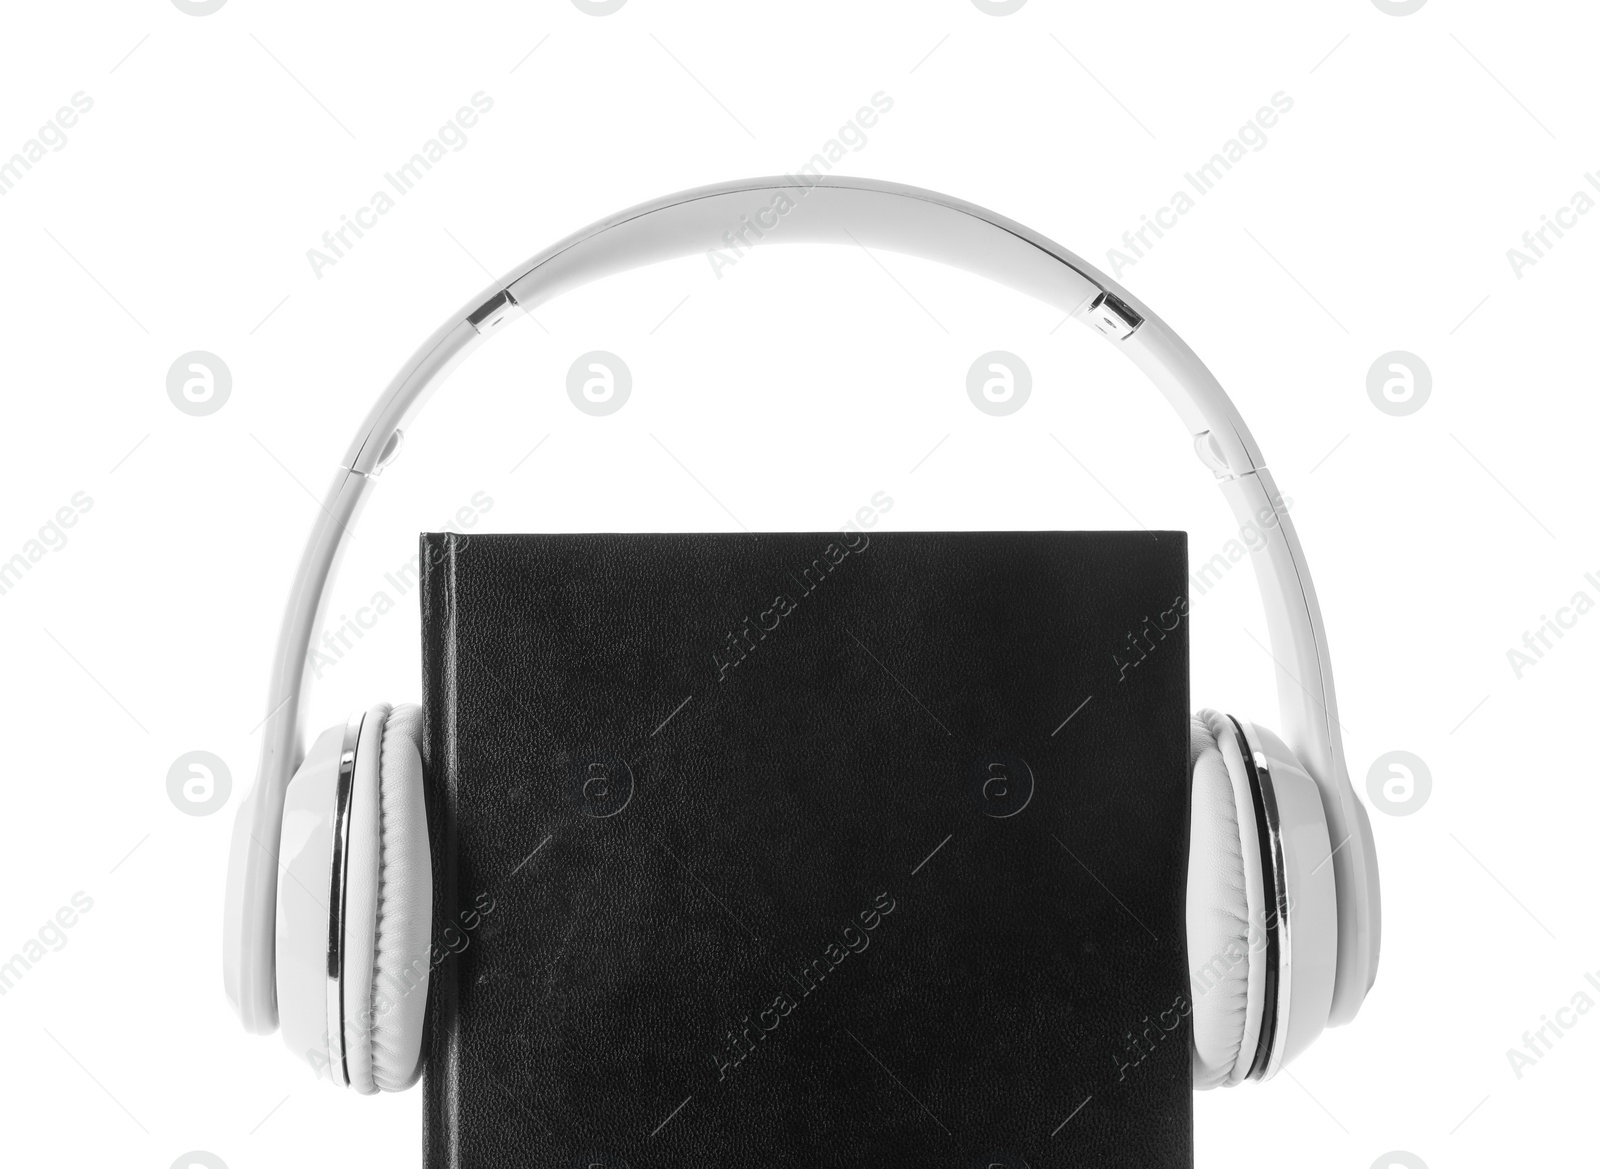 Photo of Bible and headphones on white background. Religious audiobook